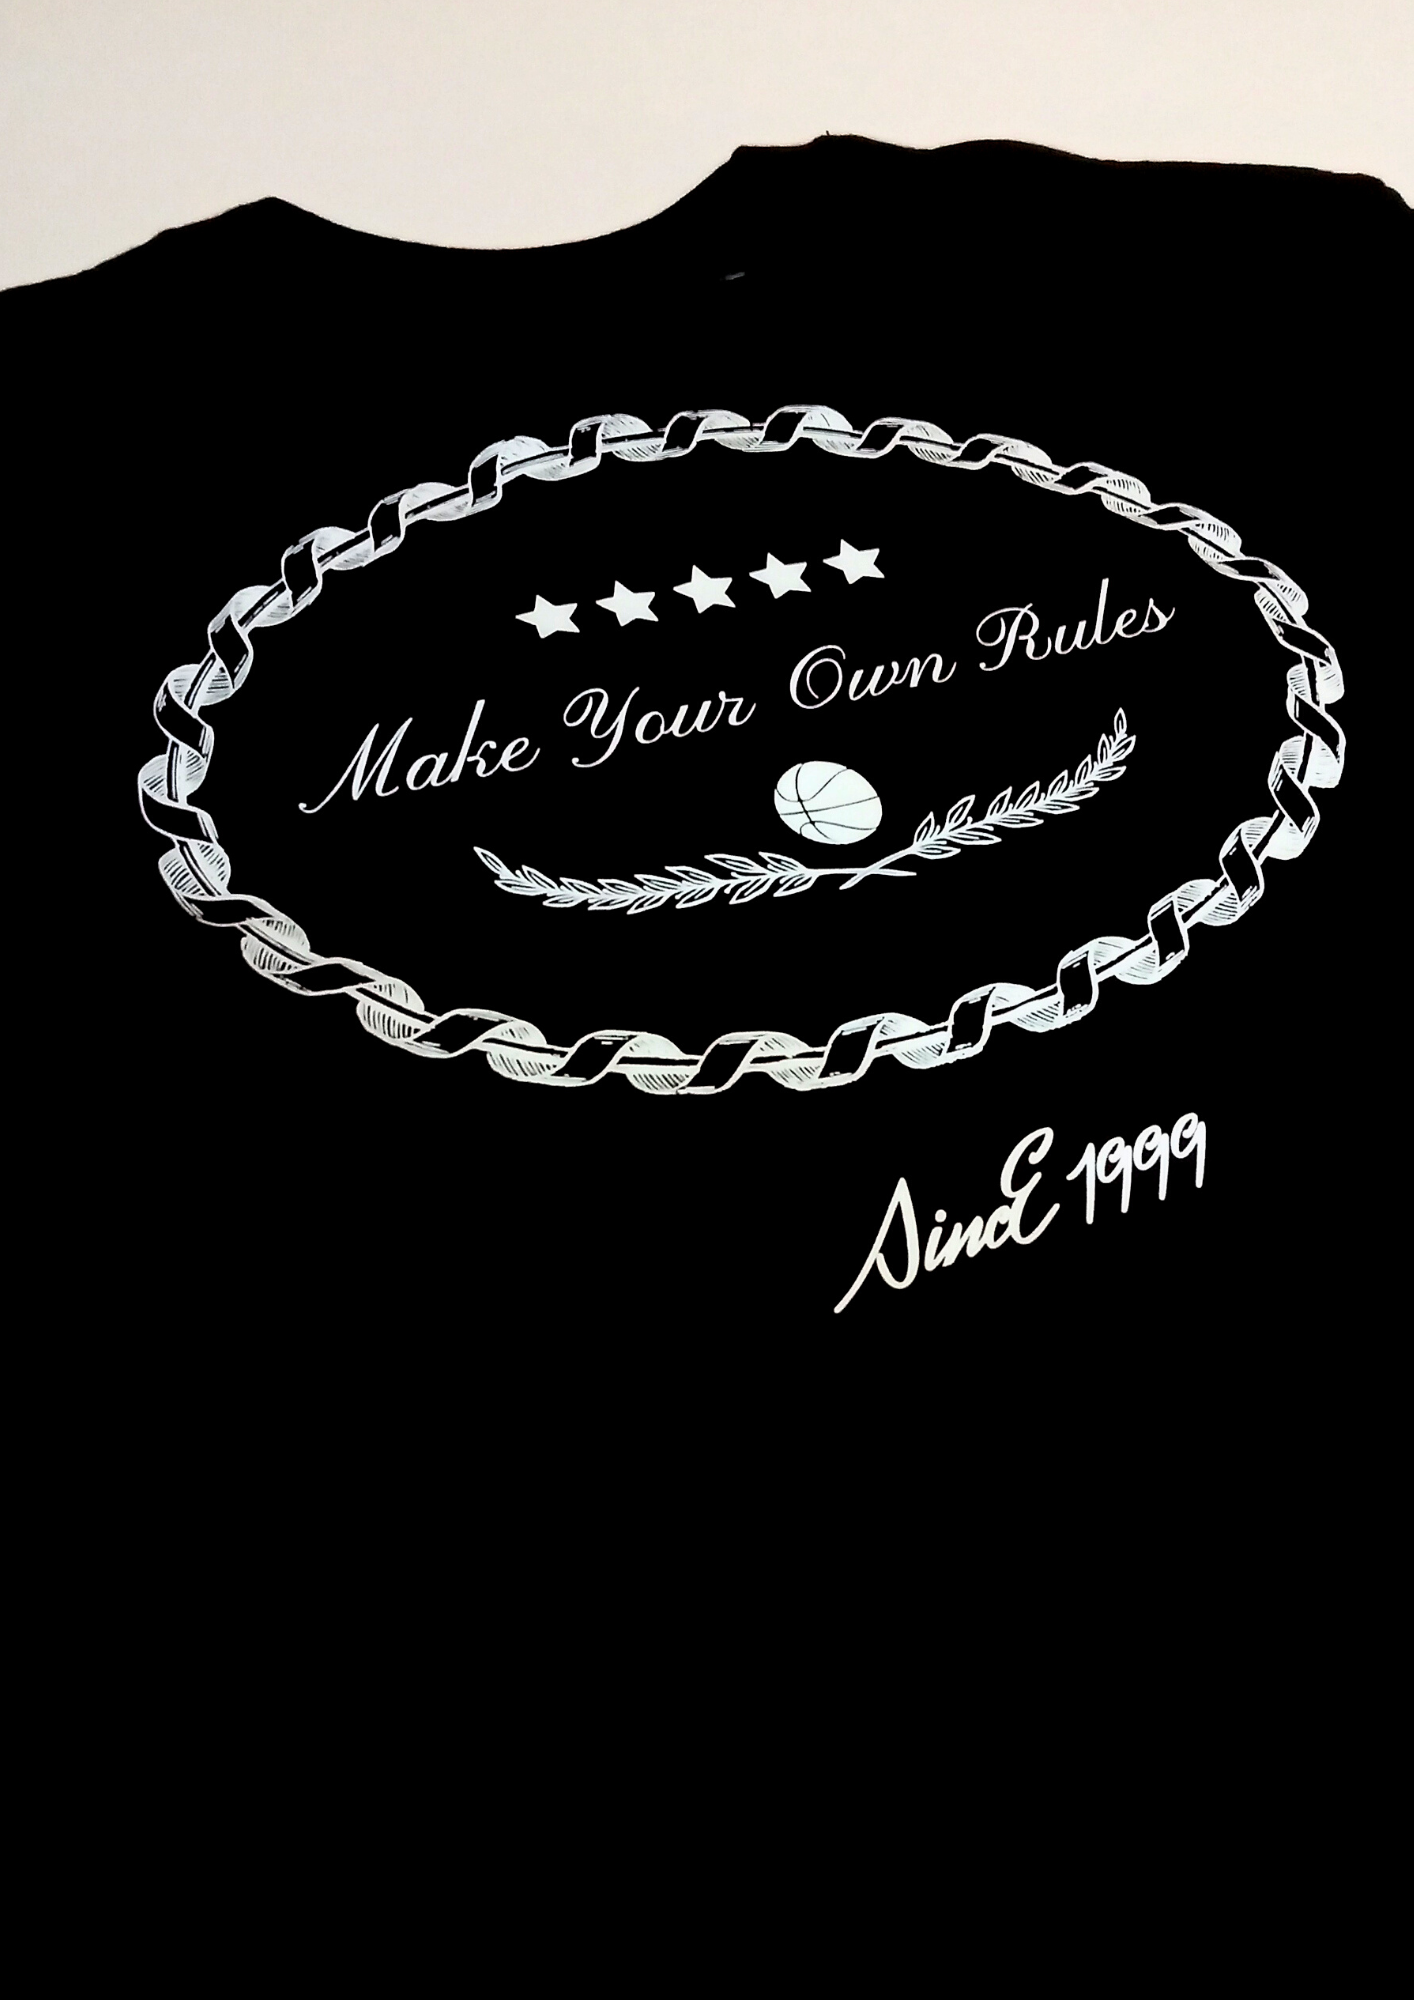 MAKE YOUR OWN RULES T-SHIRT 001